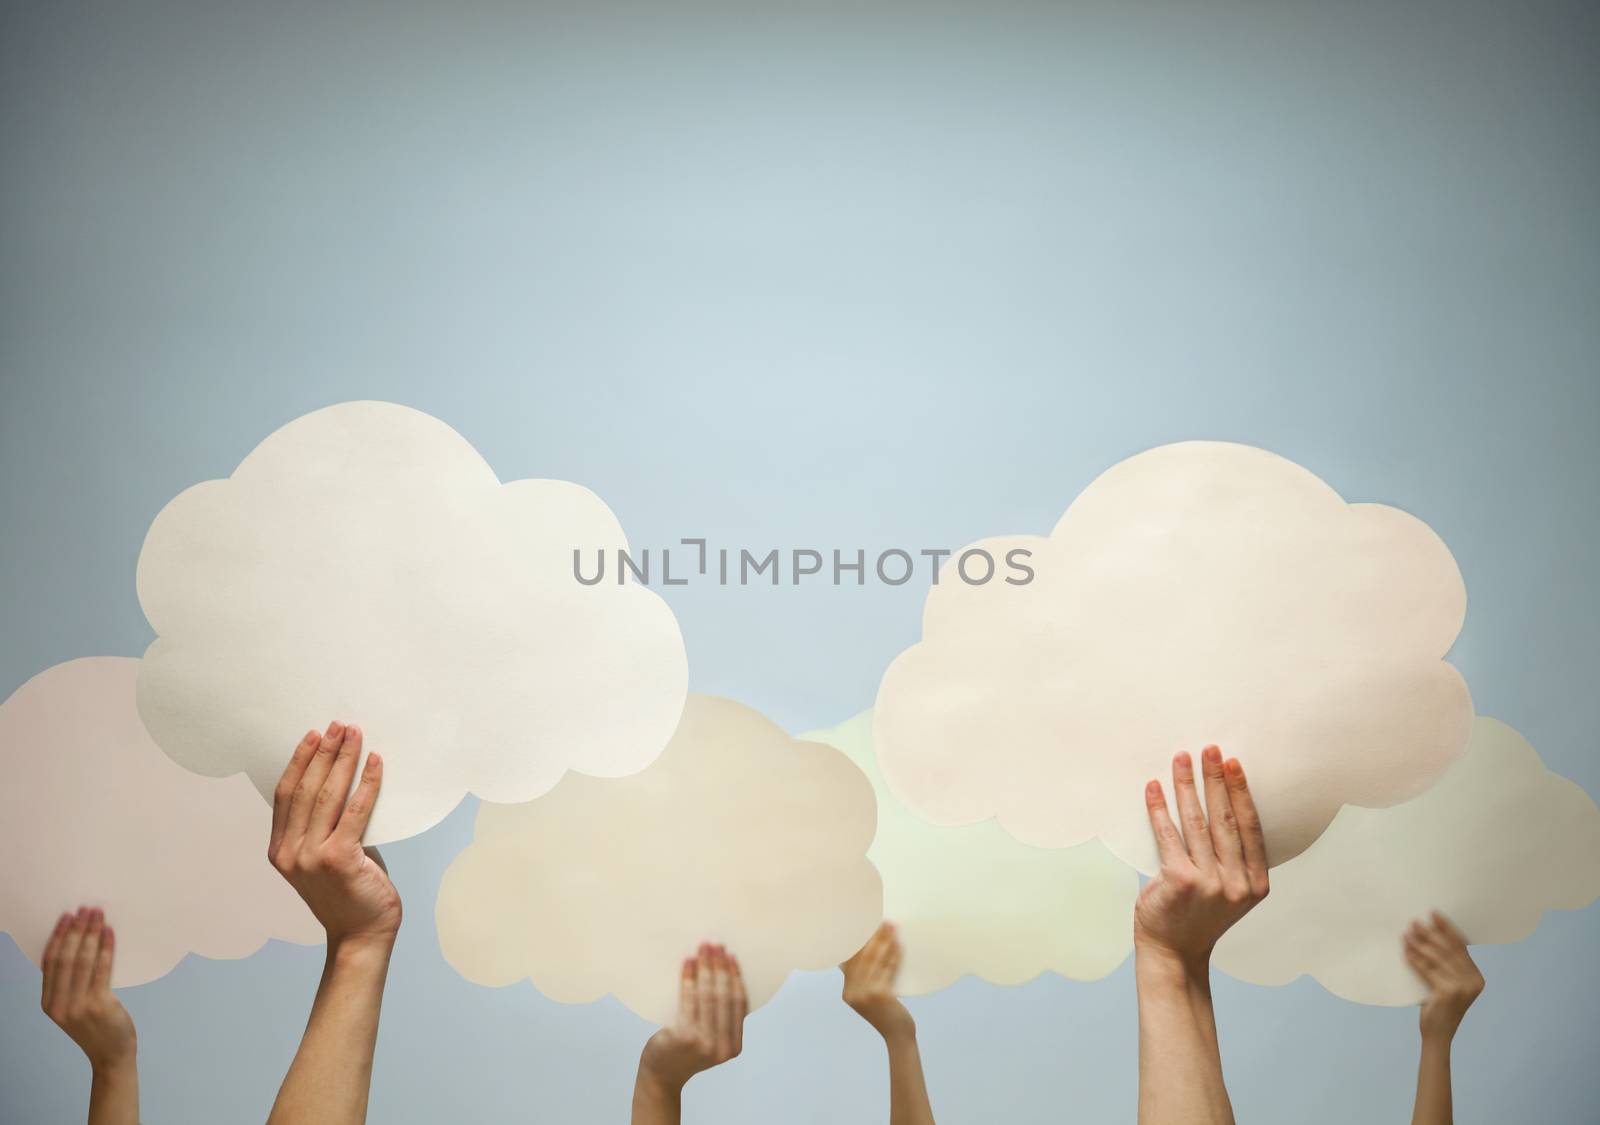 Multiple hands holding cut out paper clouds against a blue background, studio shot